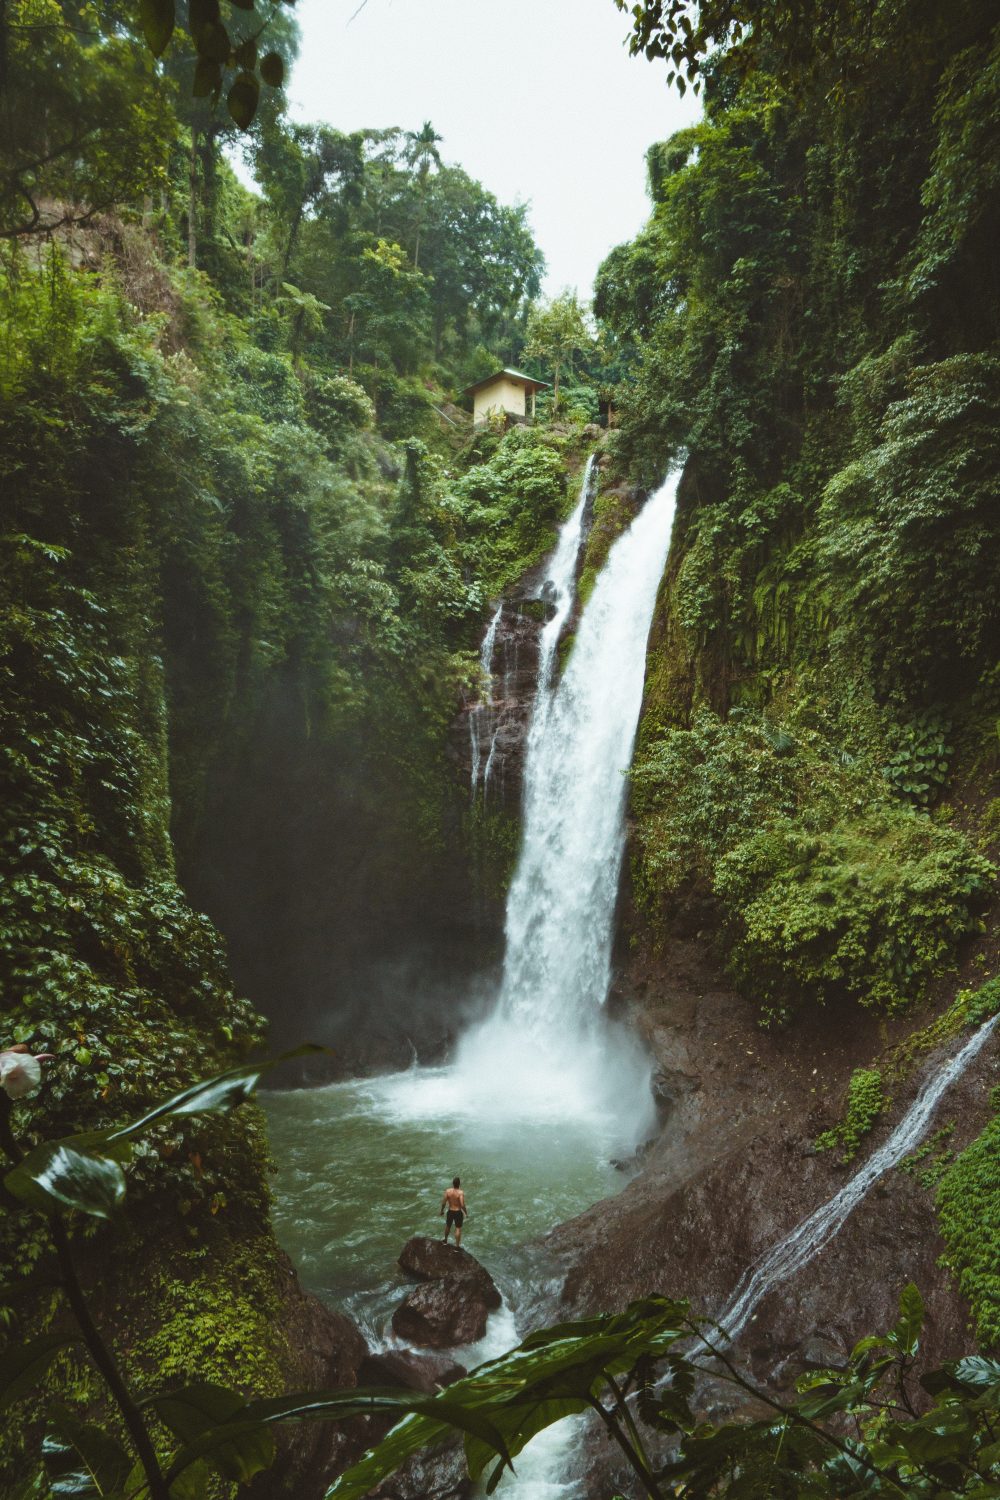 Bali photos that will make you pack your stuff